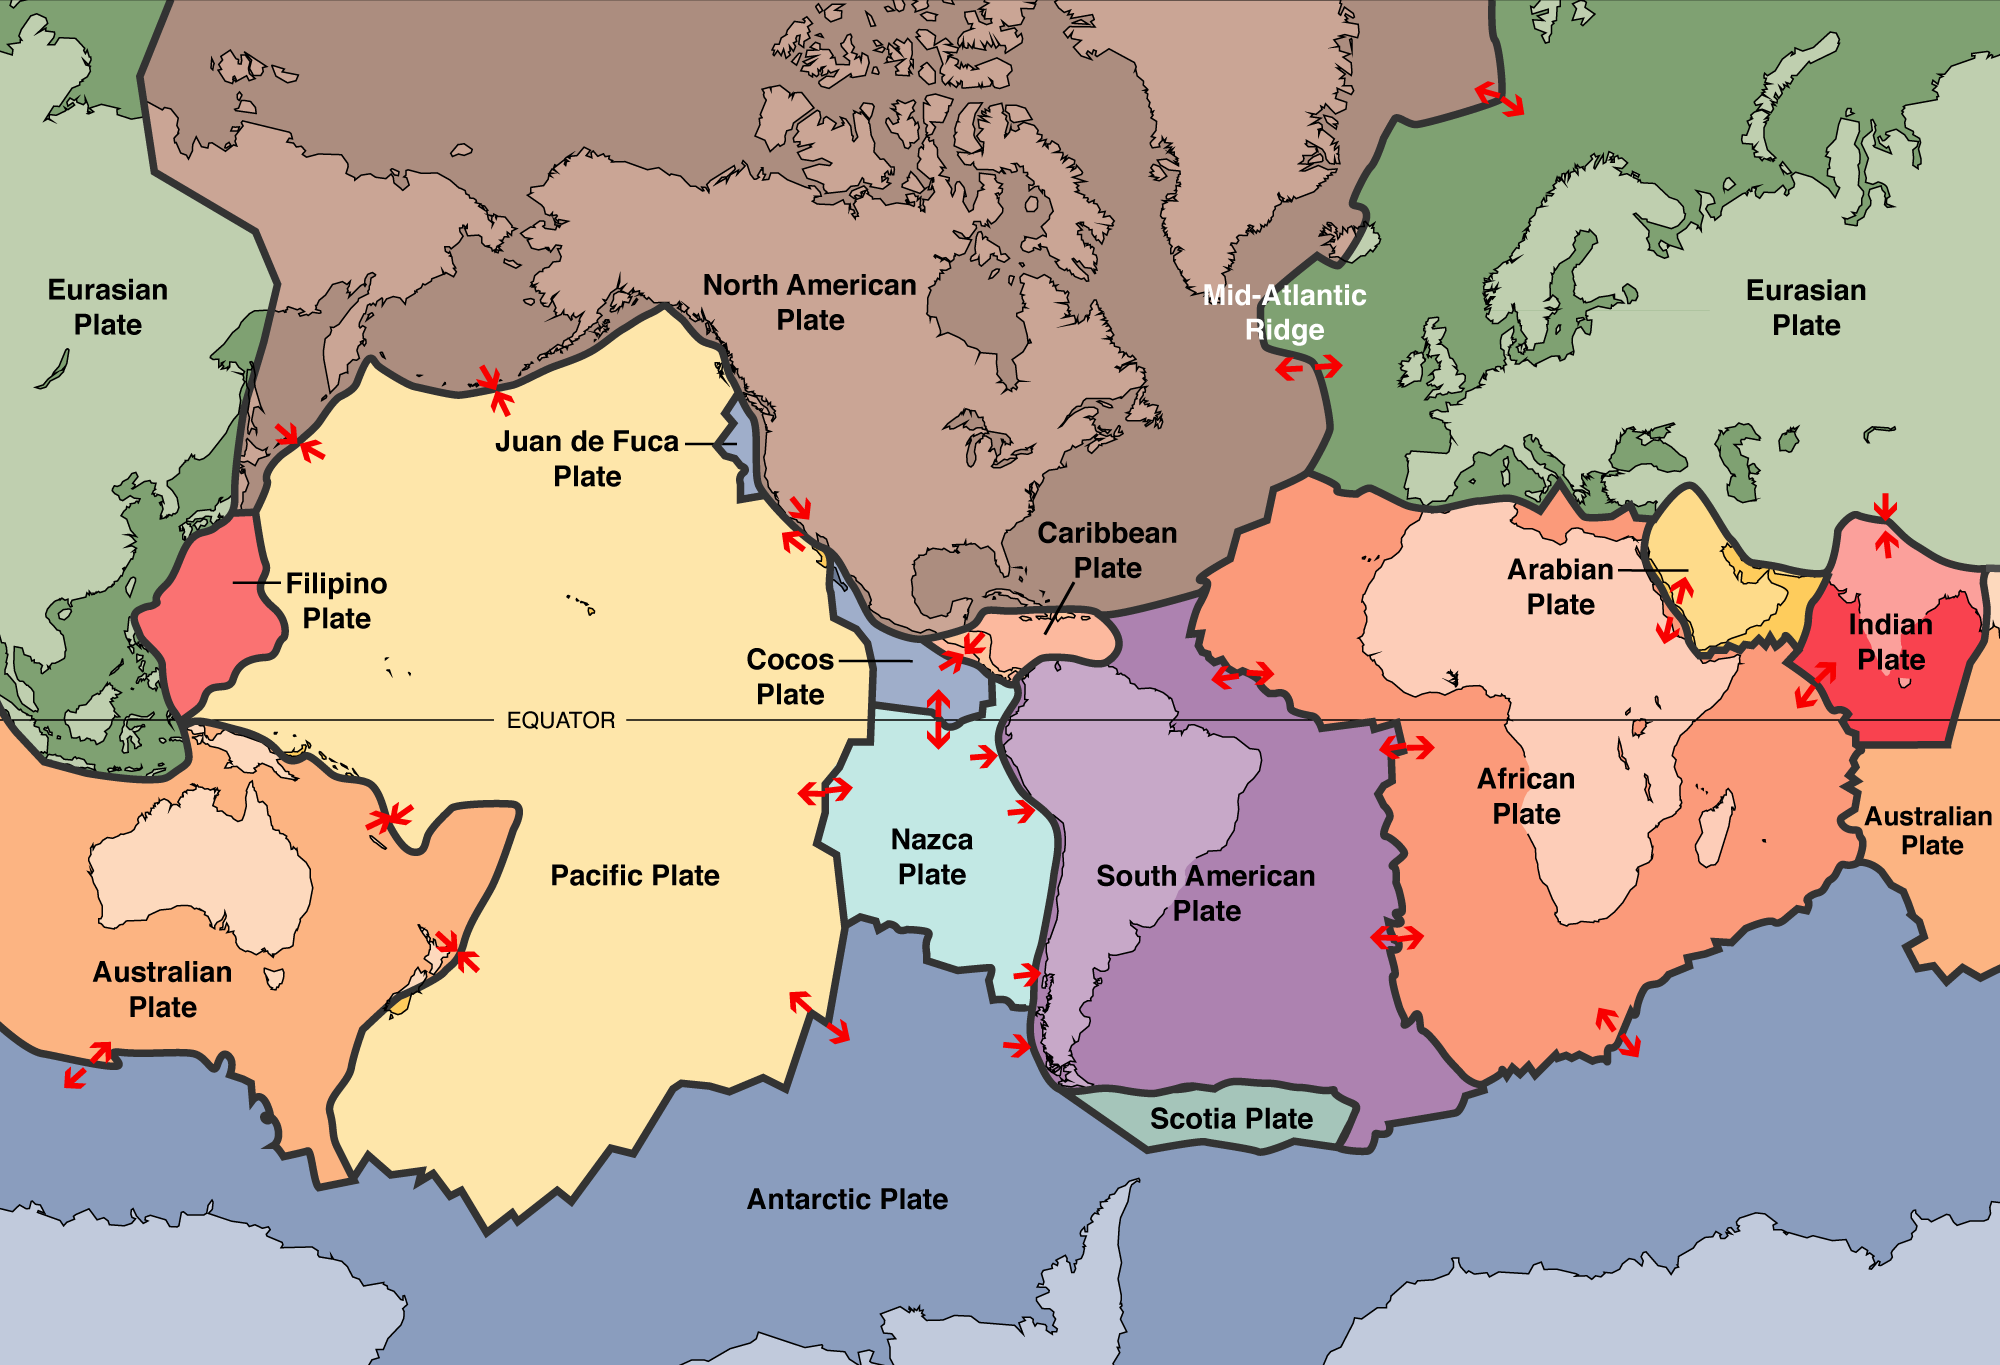 World map with plate boundaries illustrated. Lithospheric plates and the mid-Atlantic Ridge are labeled. 